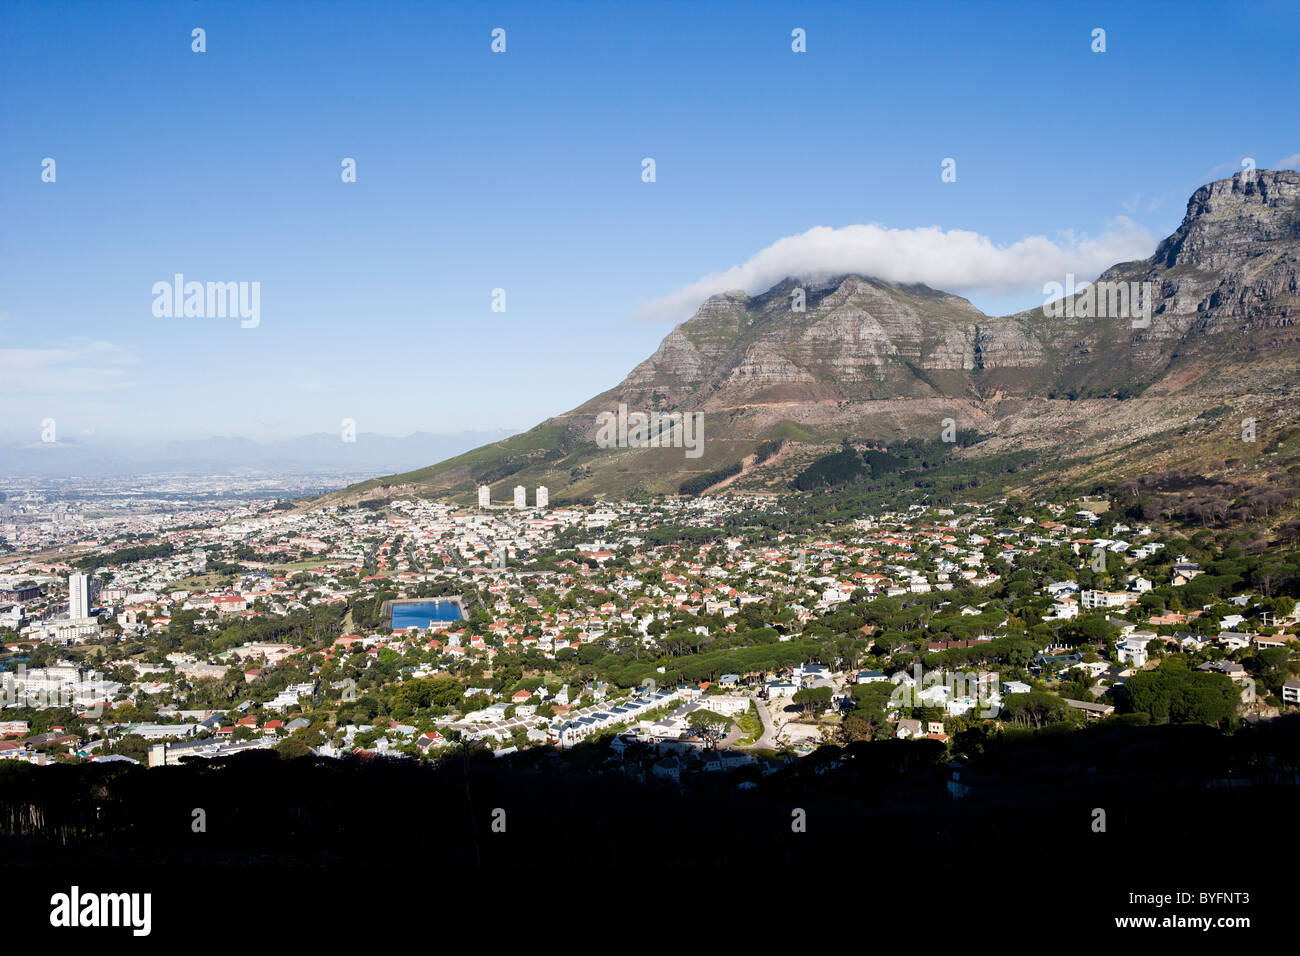 View of city with mountain in background Stock Photo